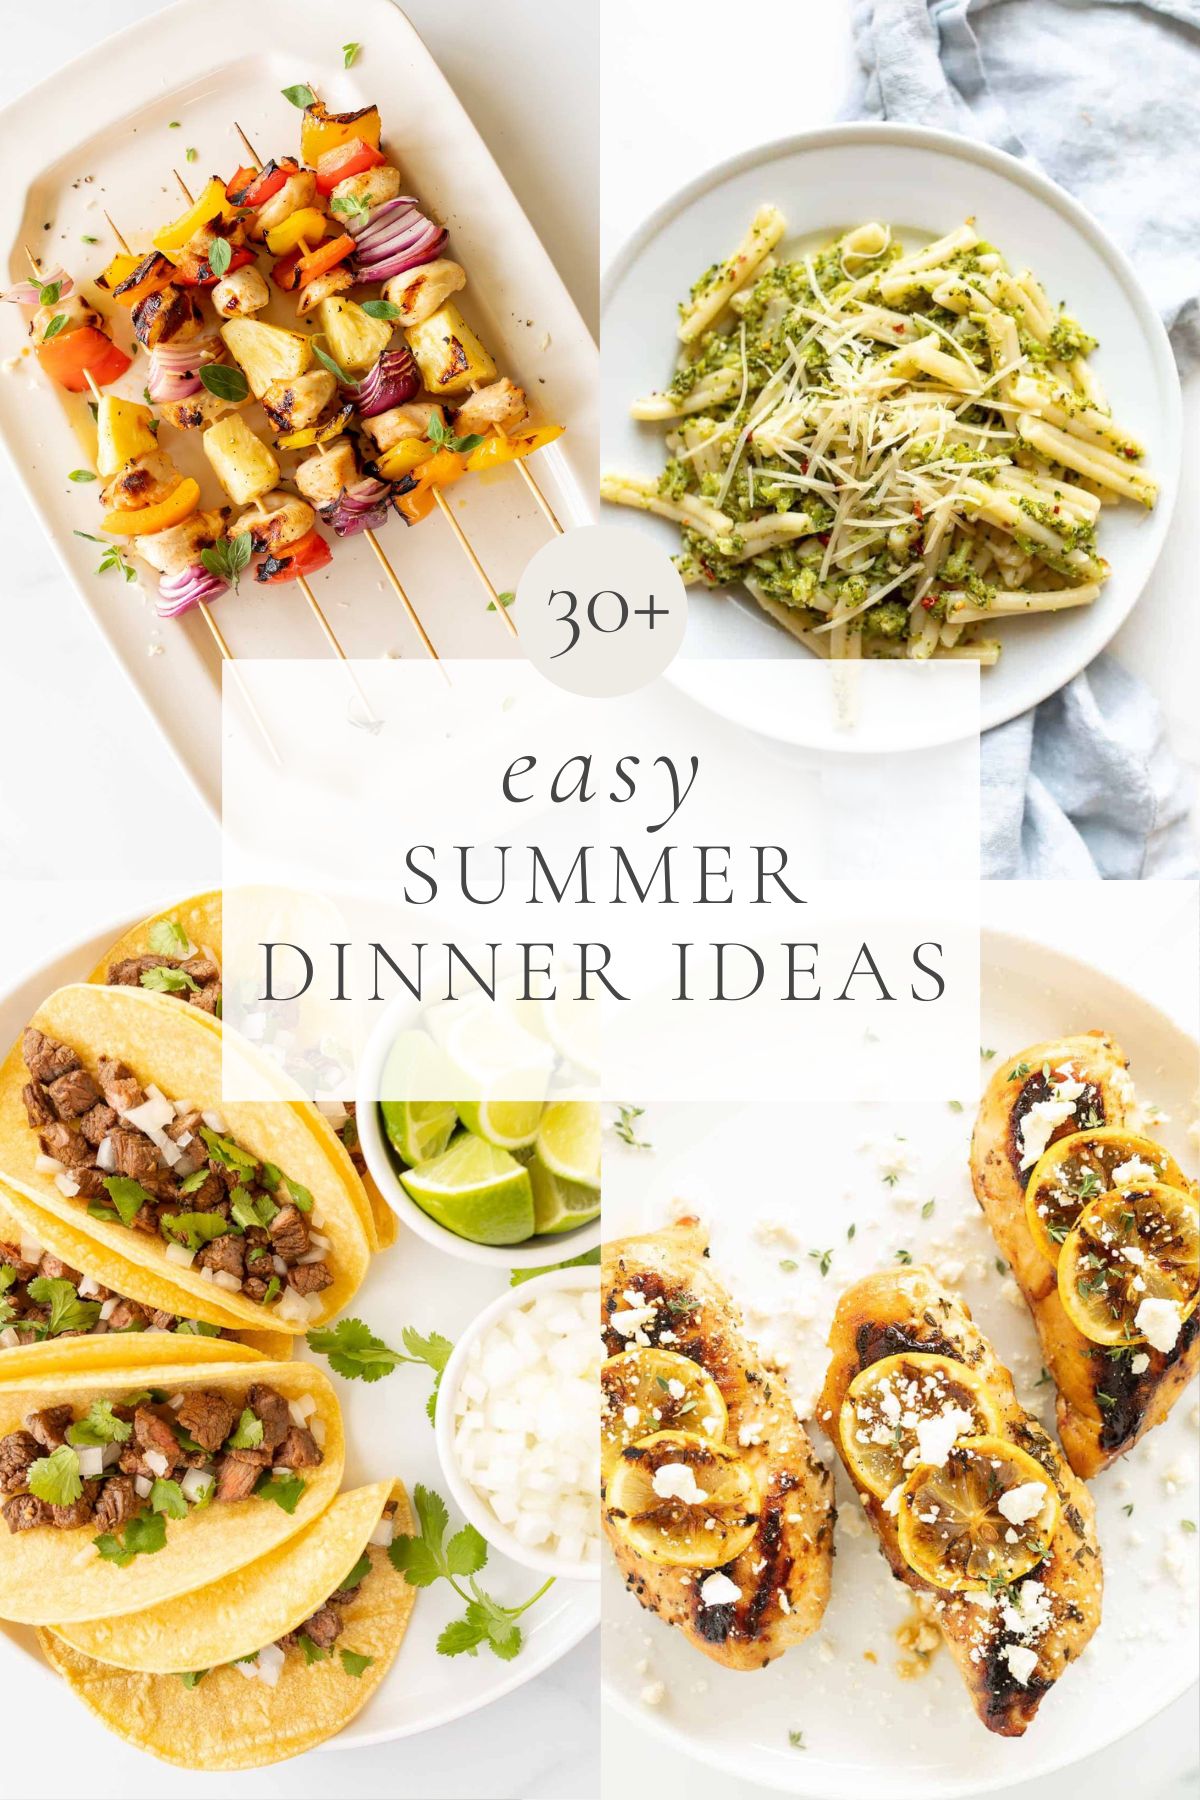 A variety of dinner option on a graphic with a headline "30" easy summer dinner ideas"